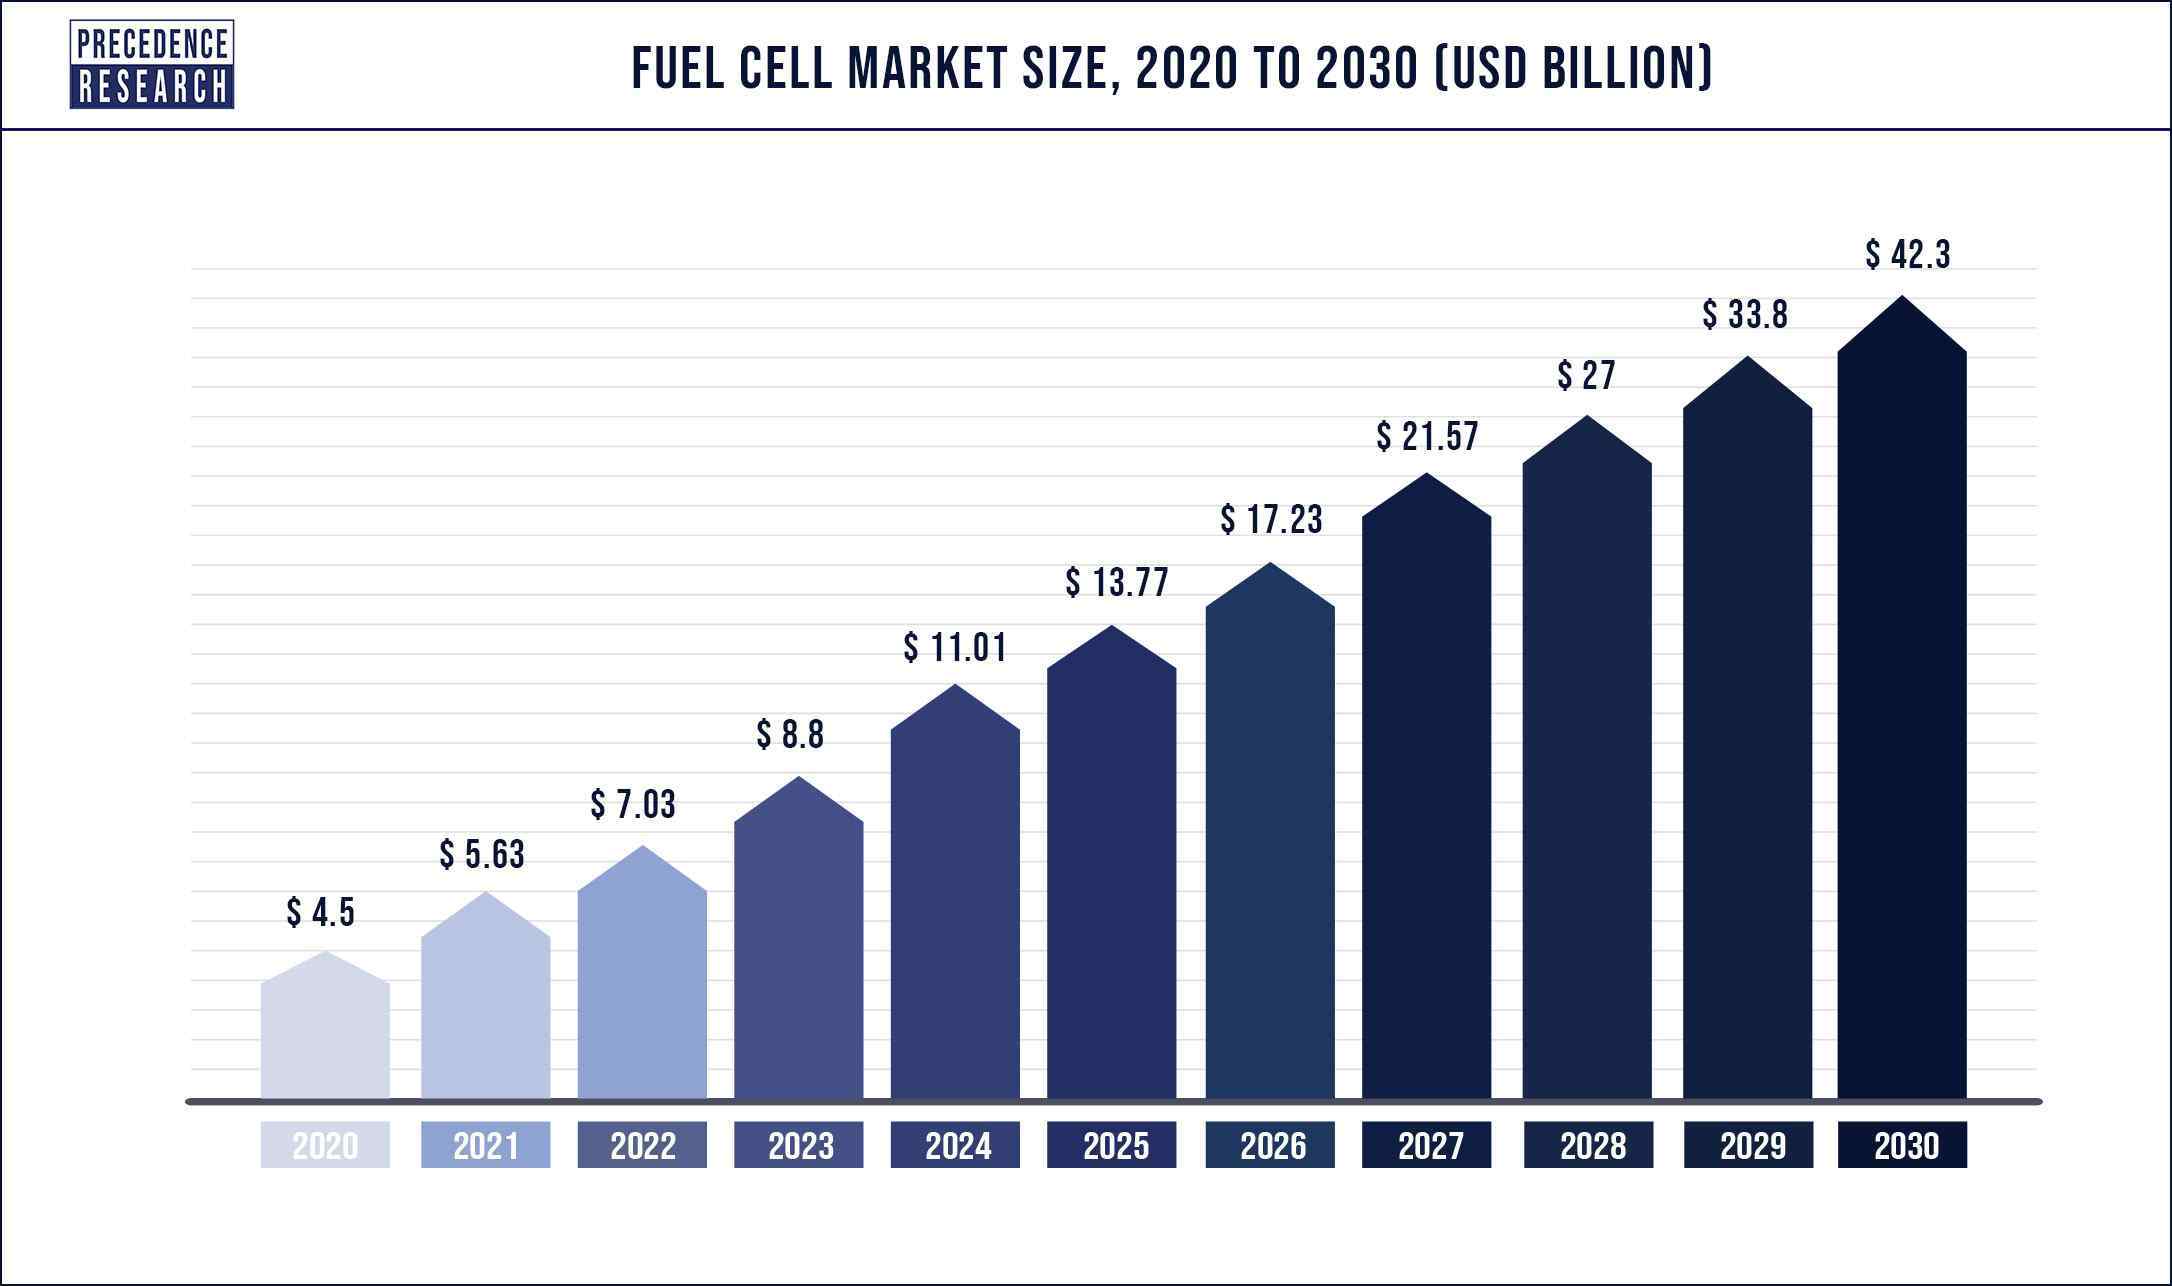 Fuel Cell Market Size 2020 to 2030